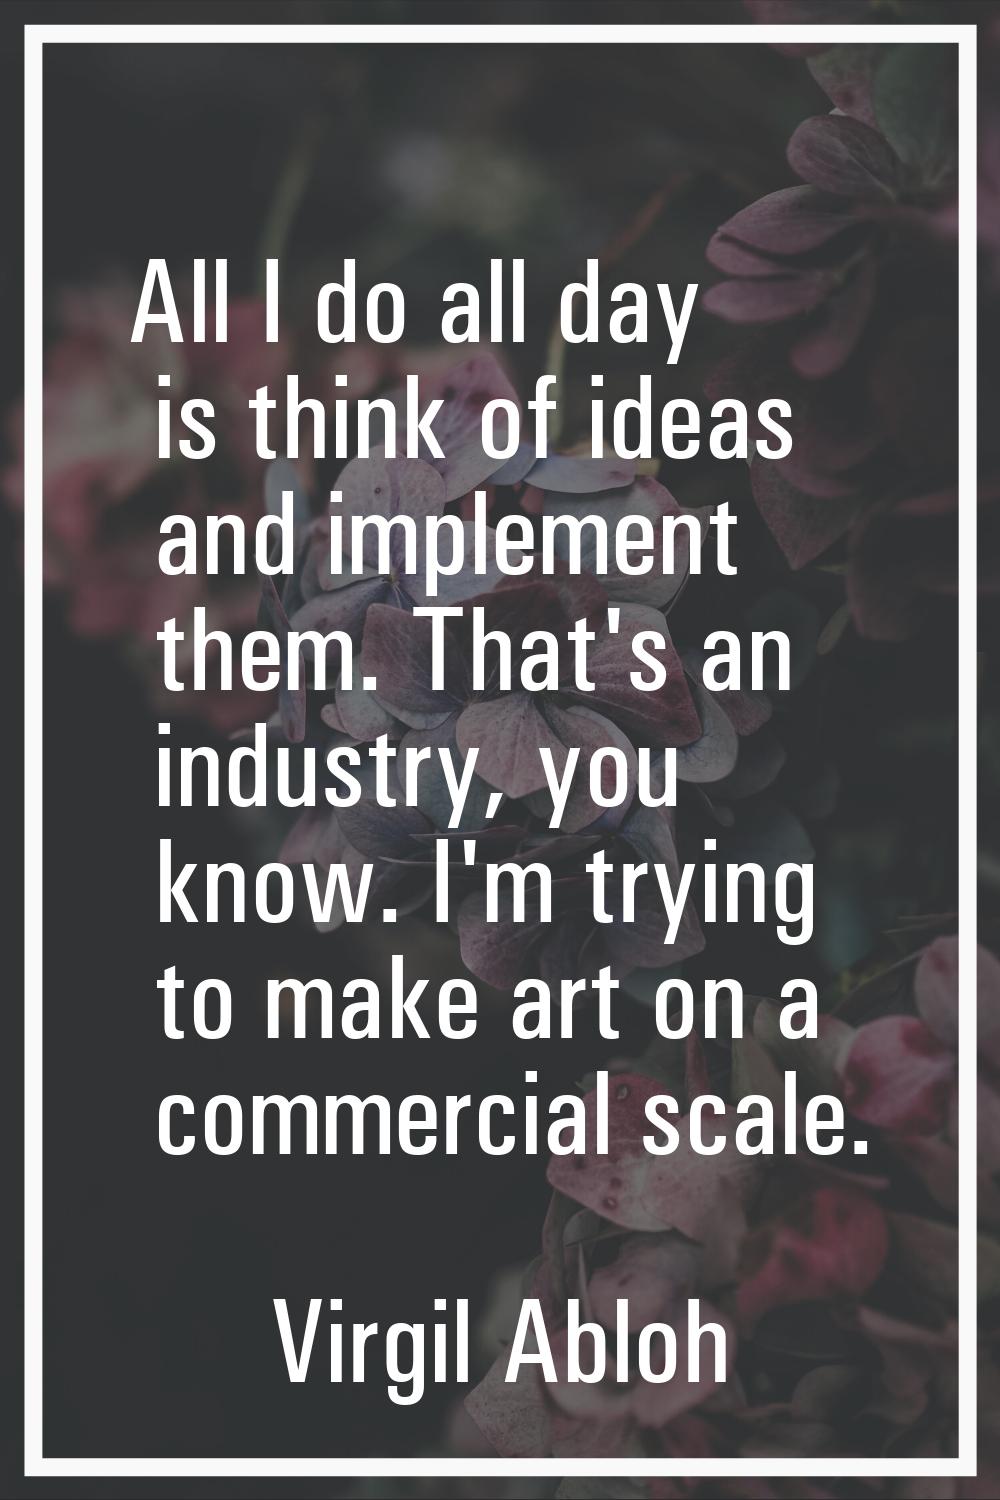 All I do all day is think of ideas and implement them. That's an industry, you know. I'm trying to 